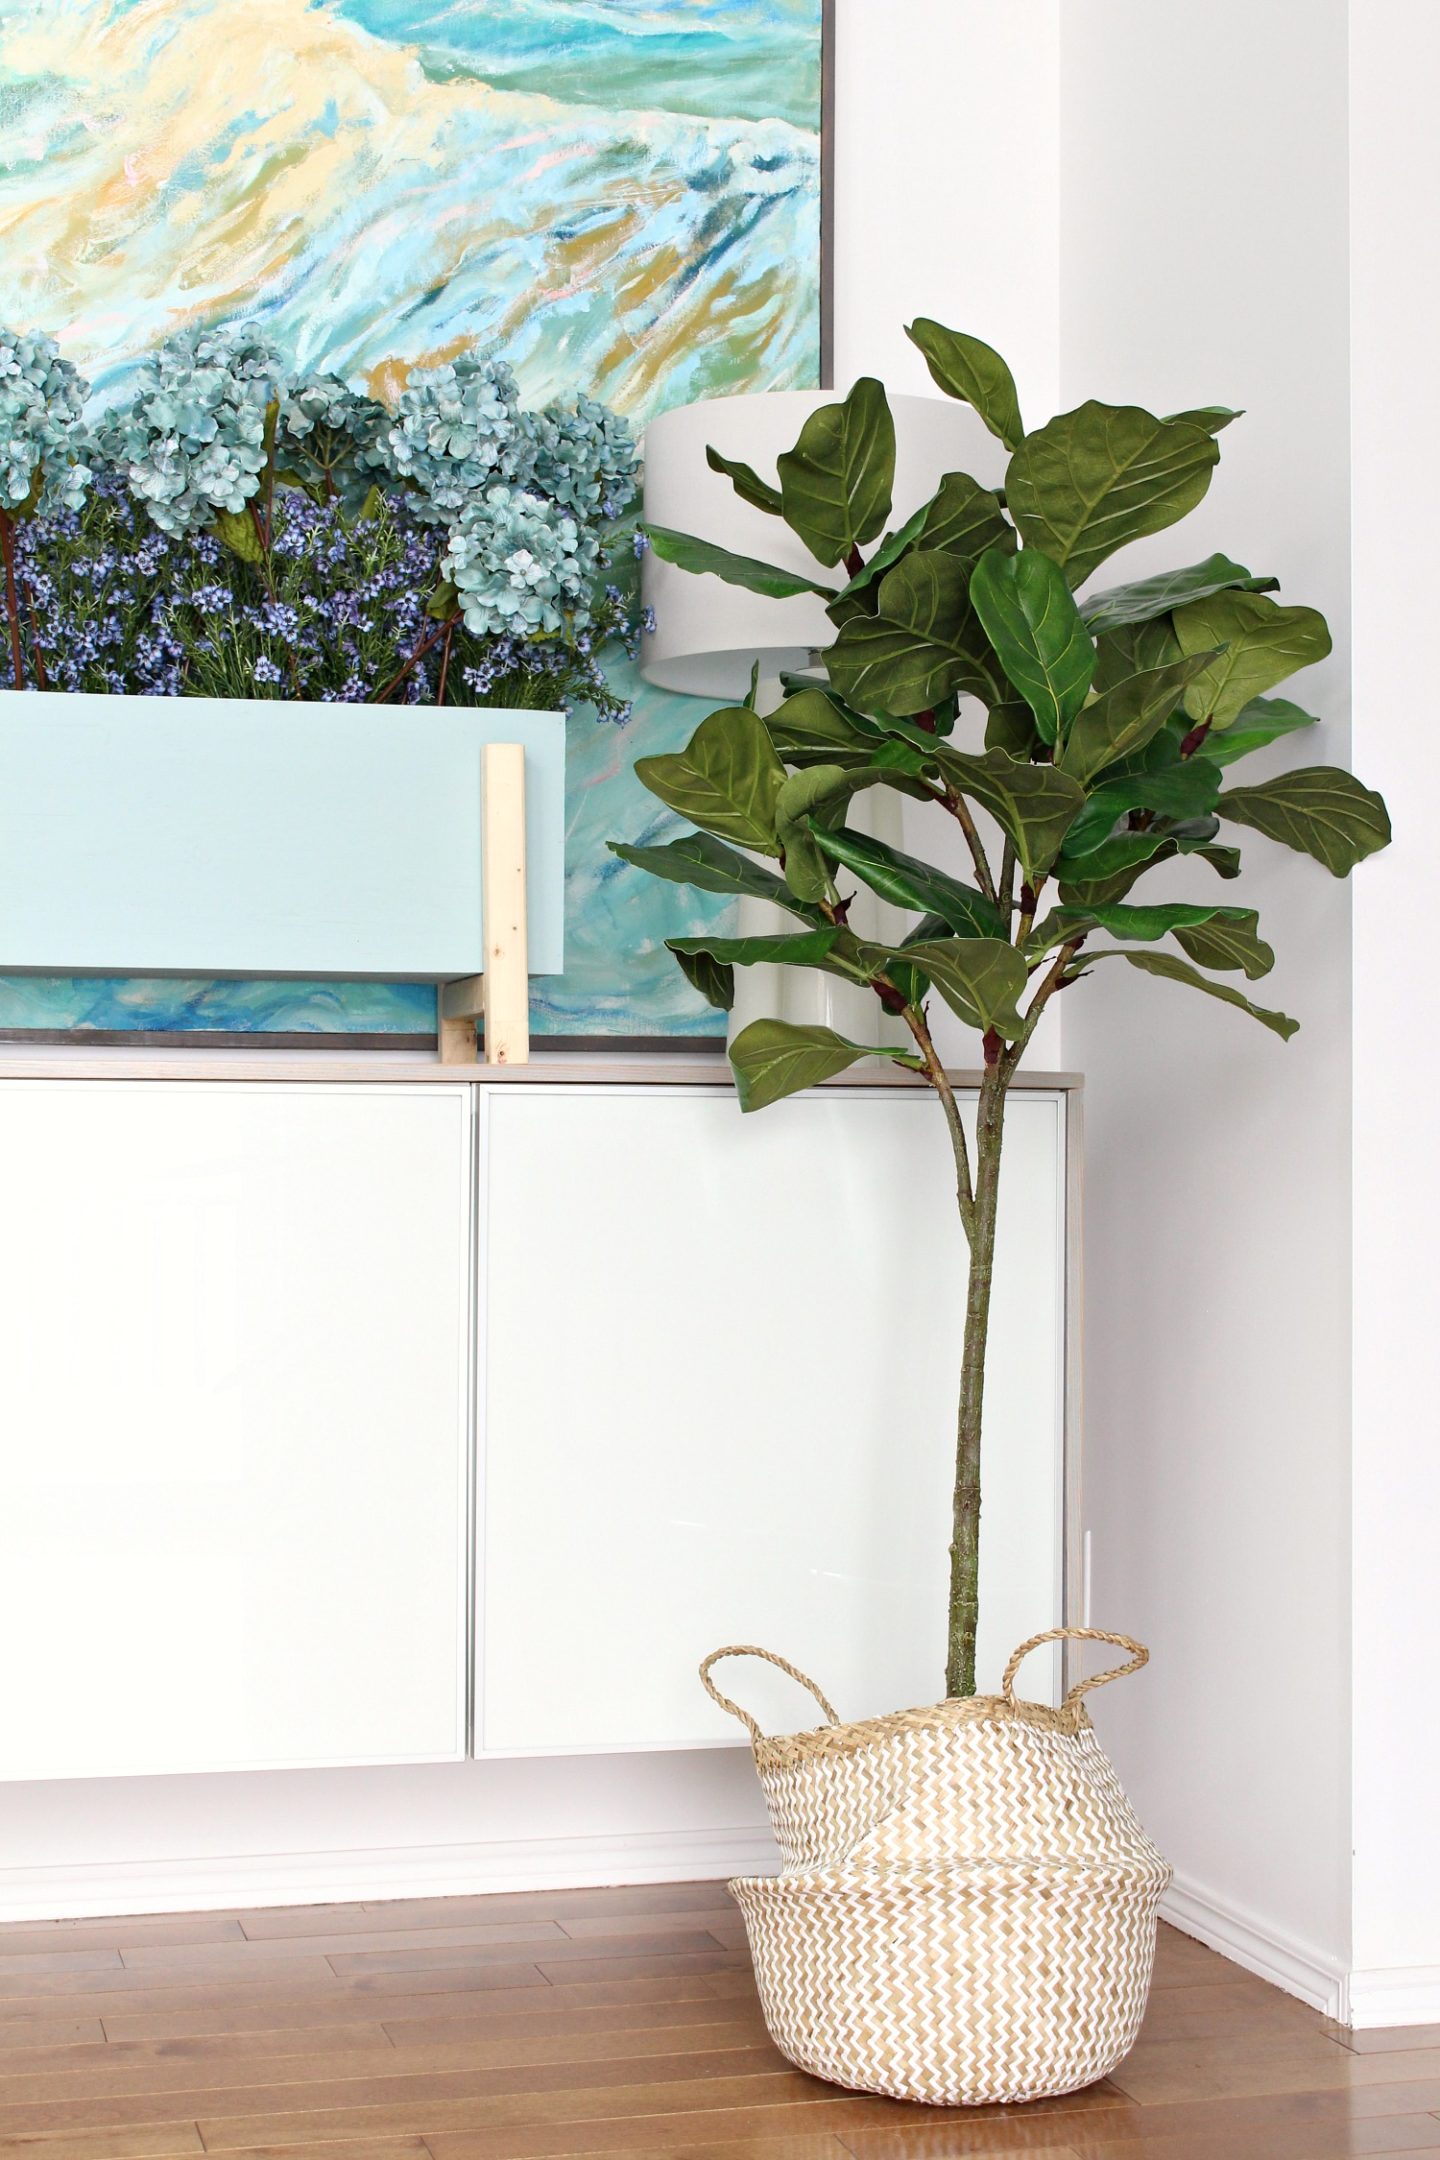 Learn How to Make This Modern DIY Planter Box for Faux Plants with Leftover Plywood and Wood Scraps #diy #homedecor #diyhomedecor #woodworking #plywoodprojects #diyplanter